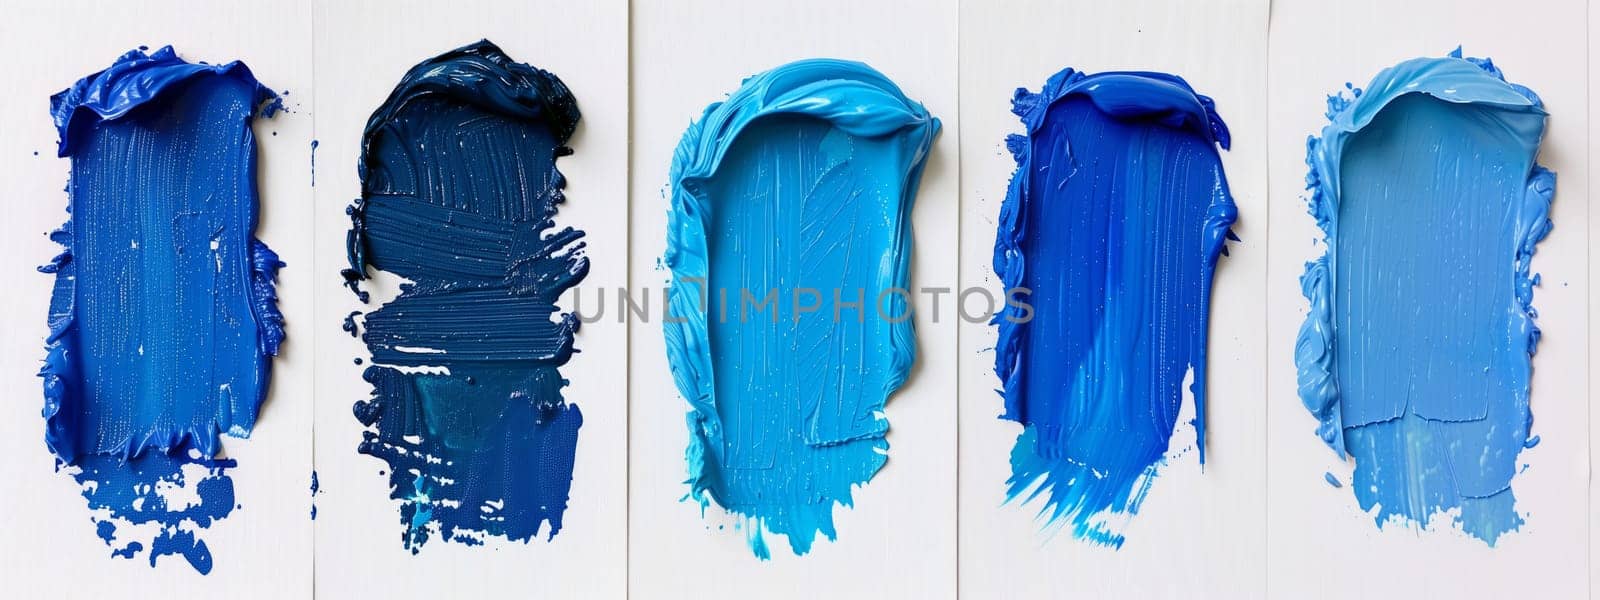 Various shades of blue paint cover a white surface by richwolf